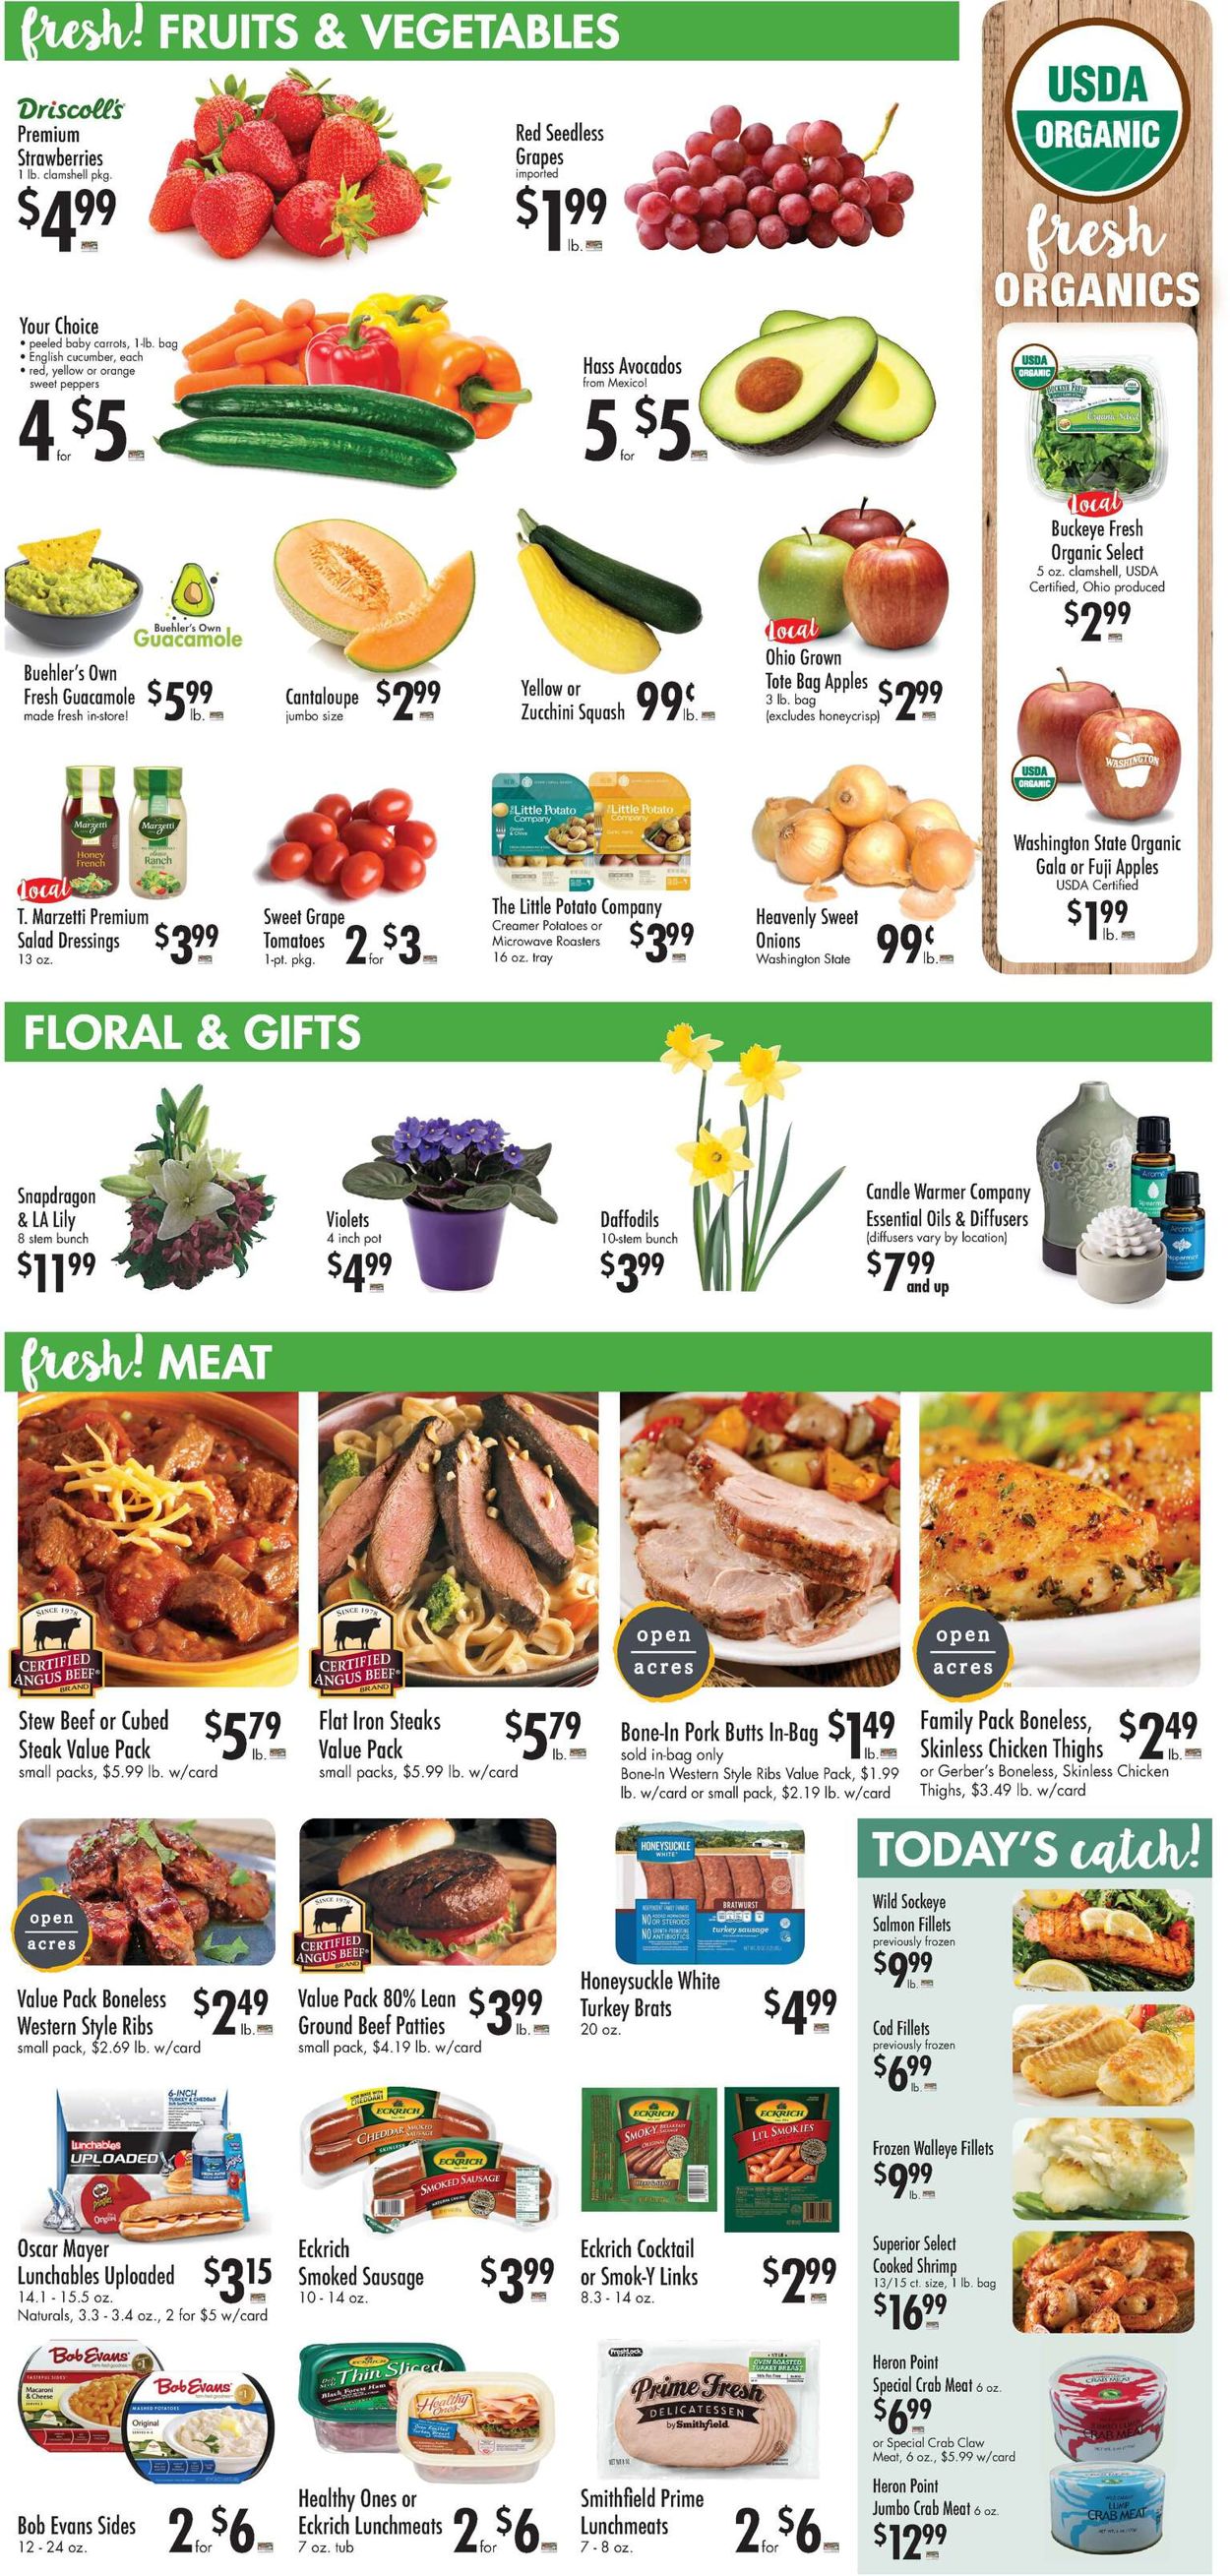 Catalogue Buehler's Fresh Foods from 03/17/2021